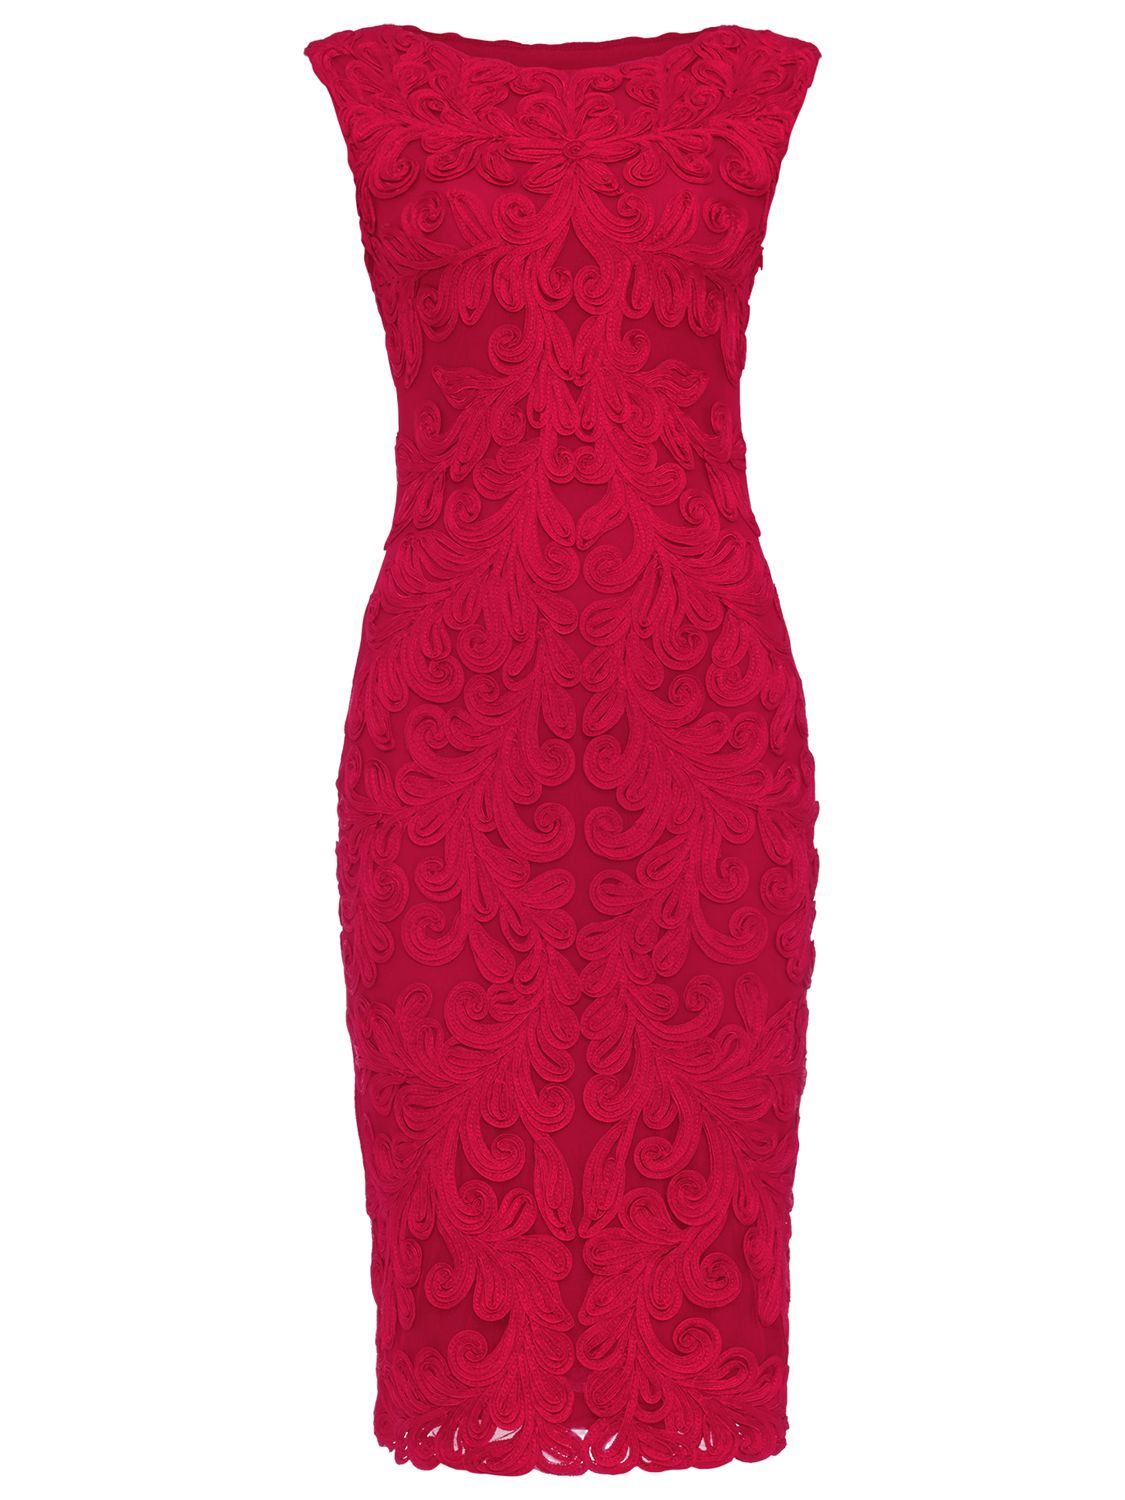 Phase Eight Tanya Tapework Dress, Red